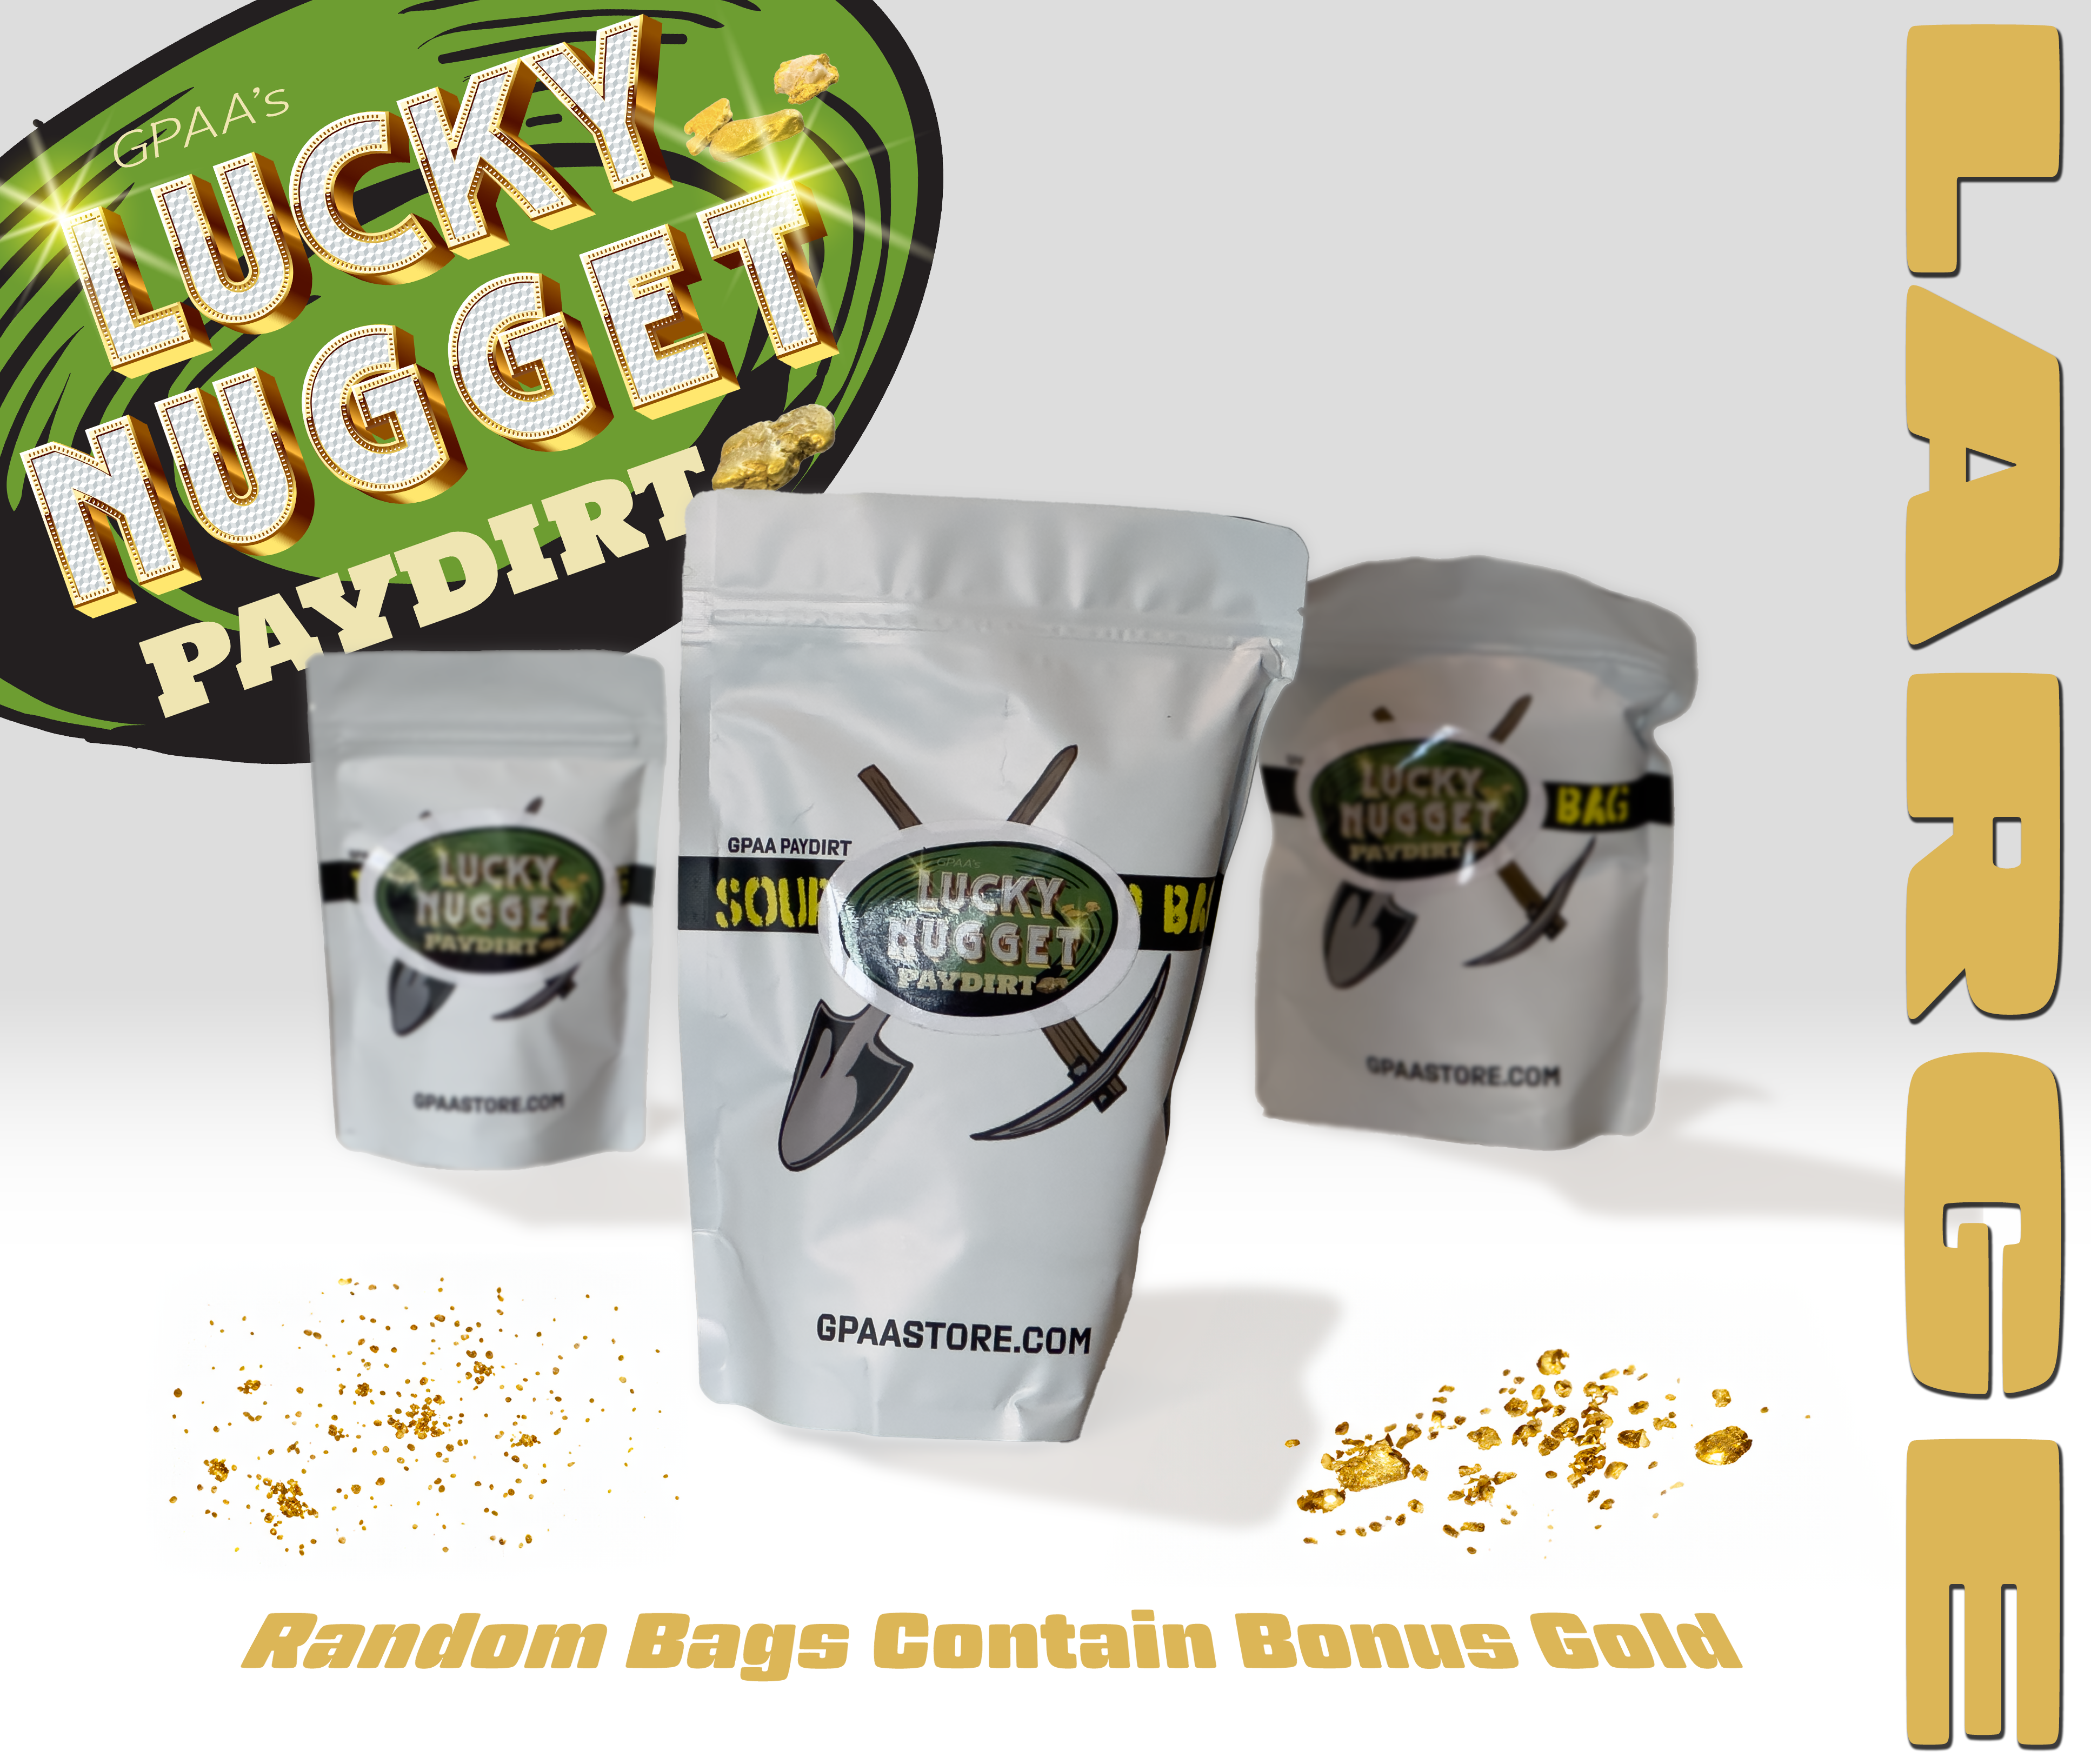 Pioneer Paydirt Pioneer Gold Paydirt Panning Pay Dirt Bag - Gold Prospecting Concentrate